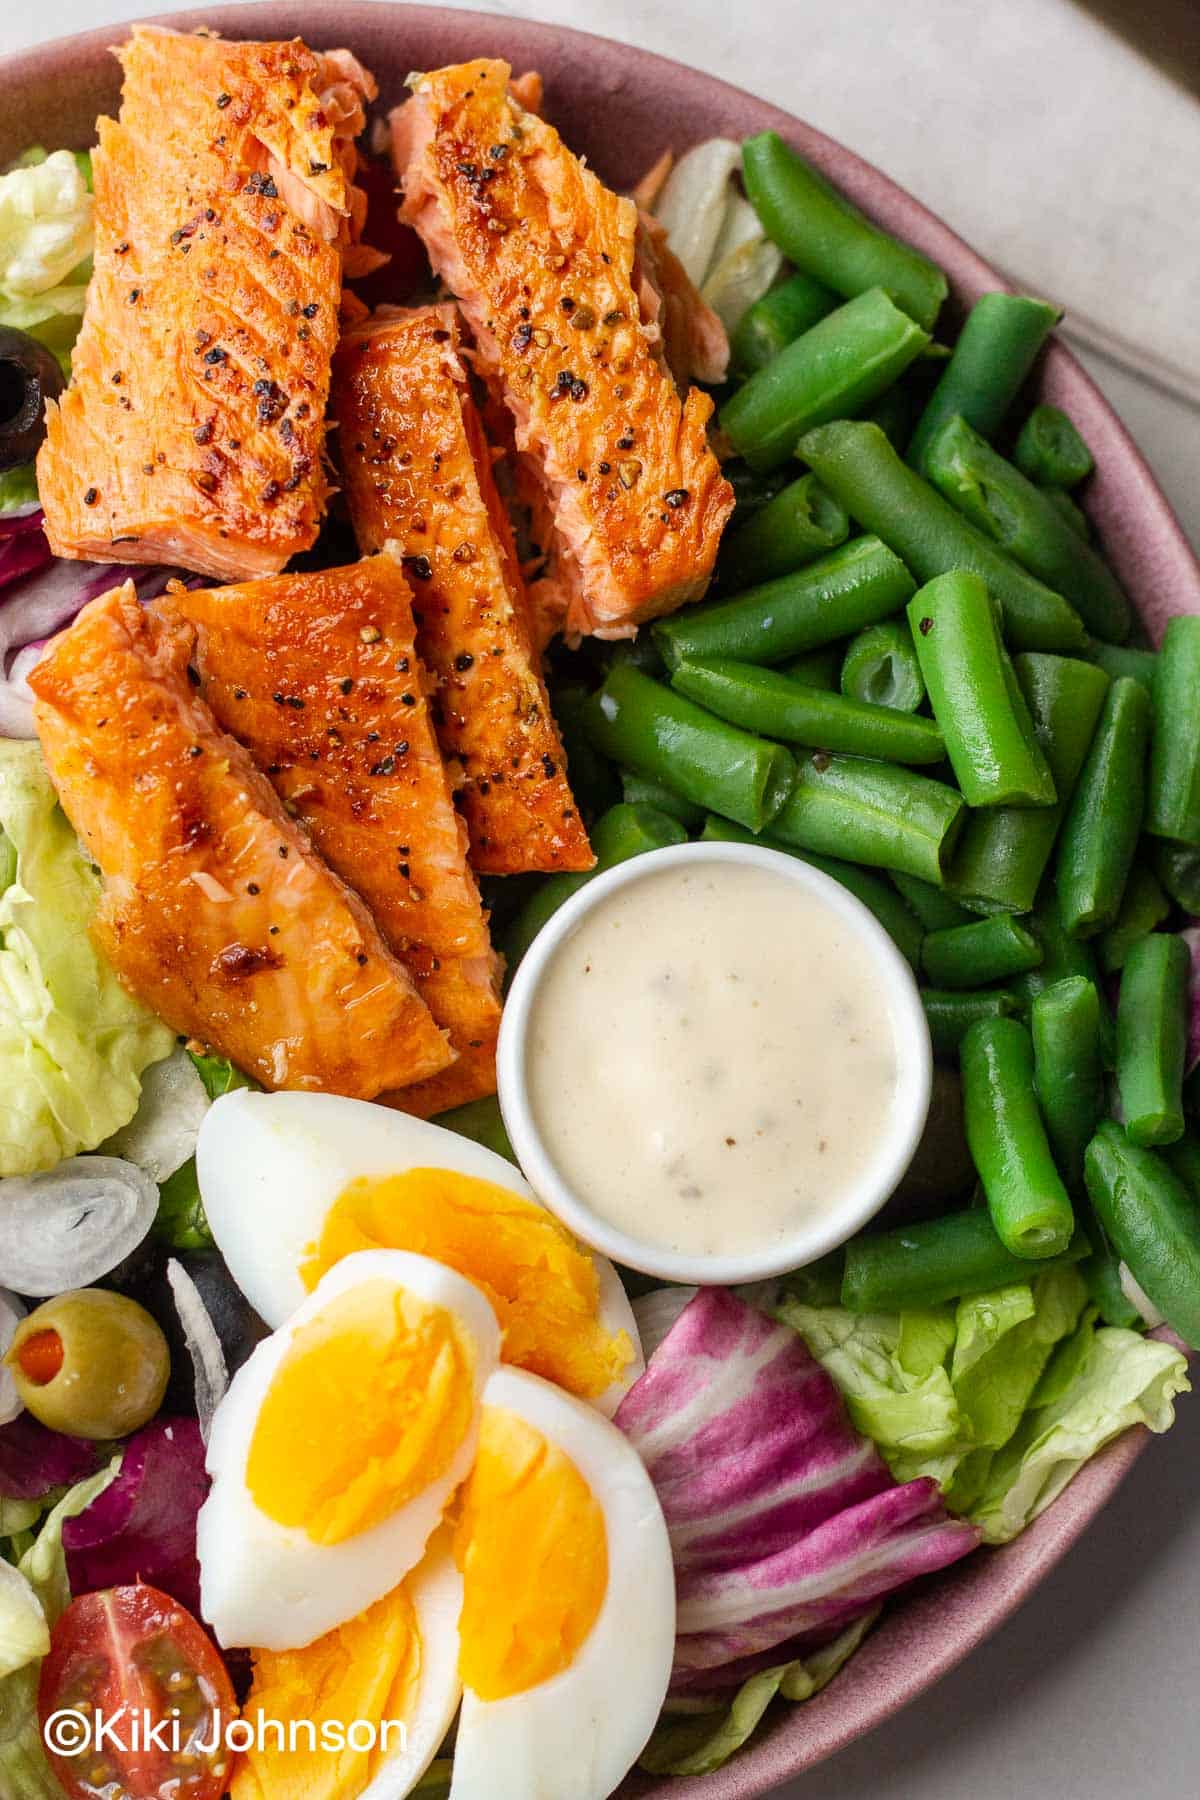 Jamie Oliver warm summer nicoise salad with salmon and egg on a plate